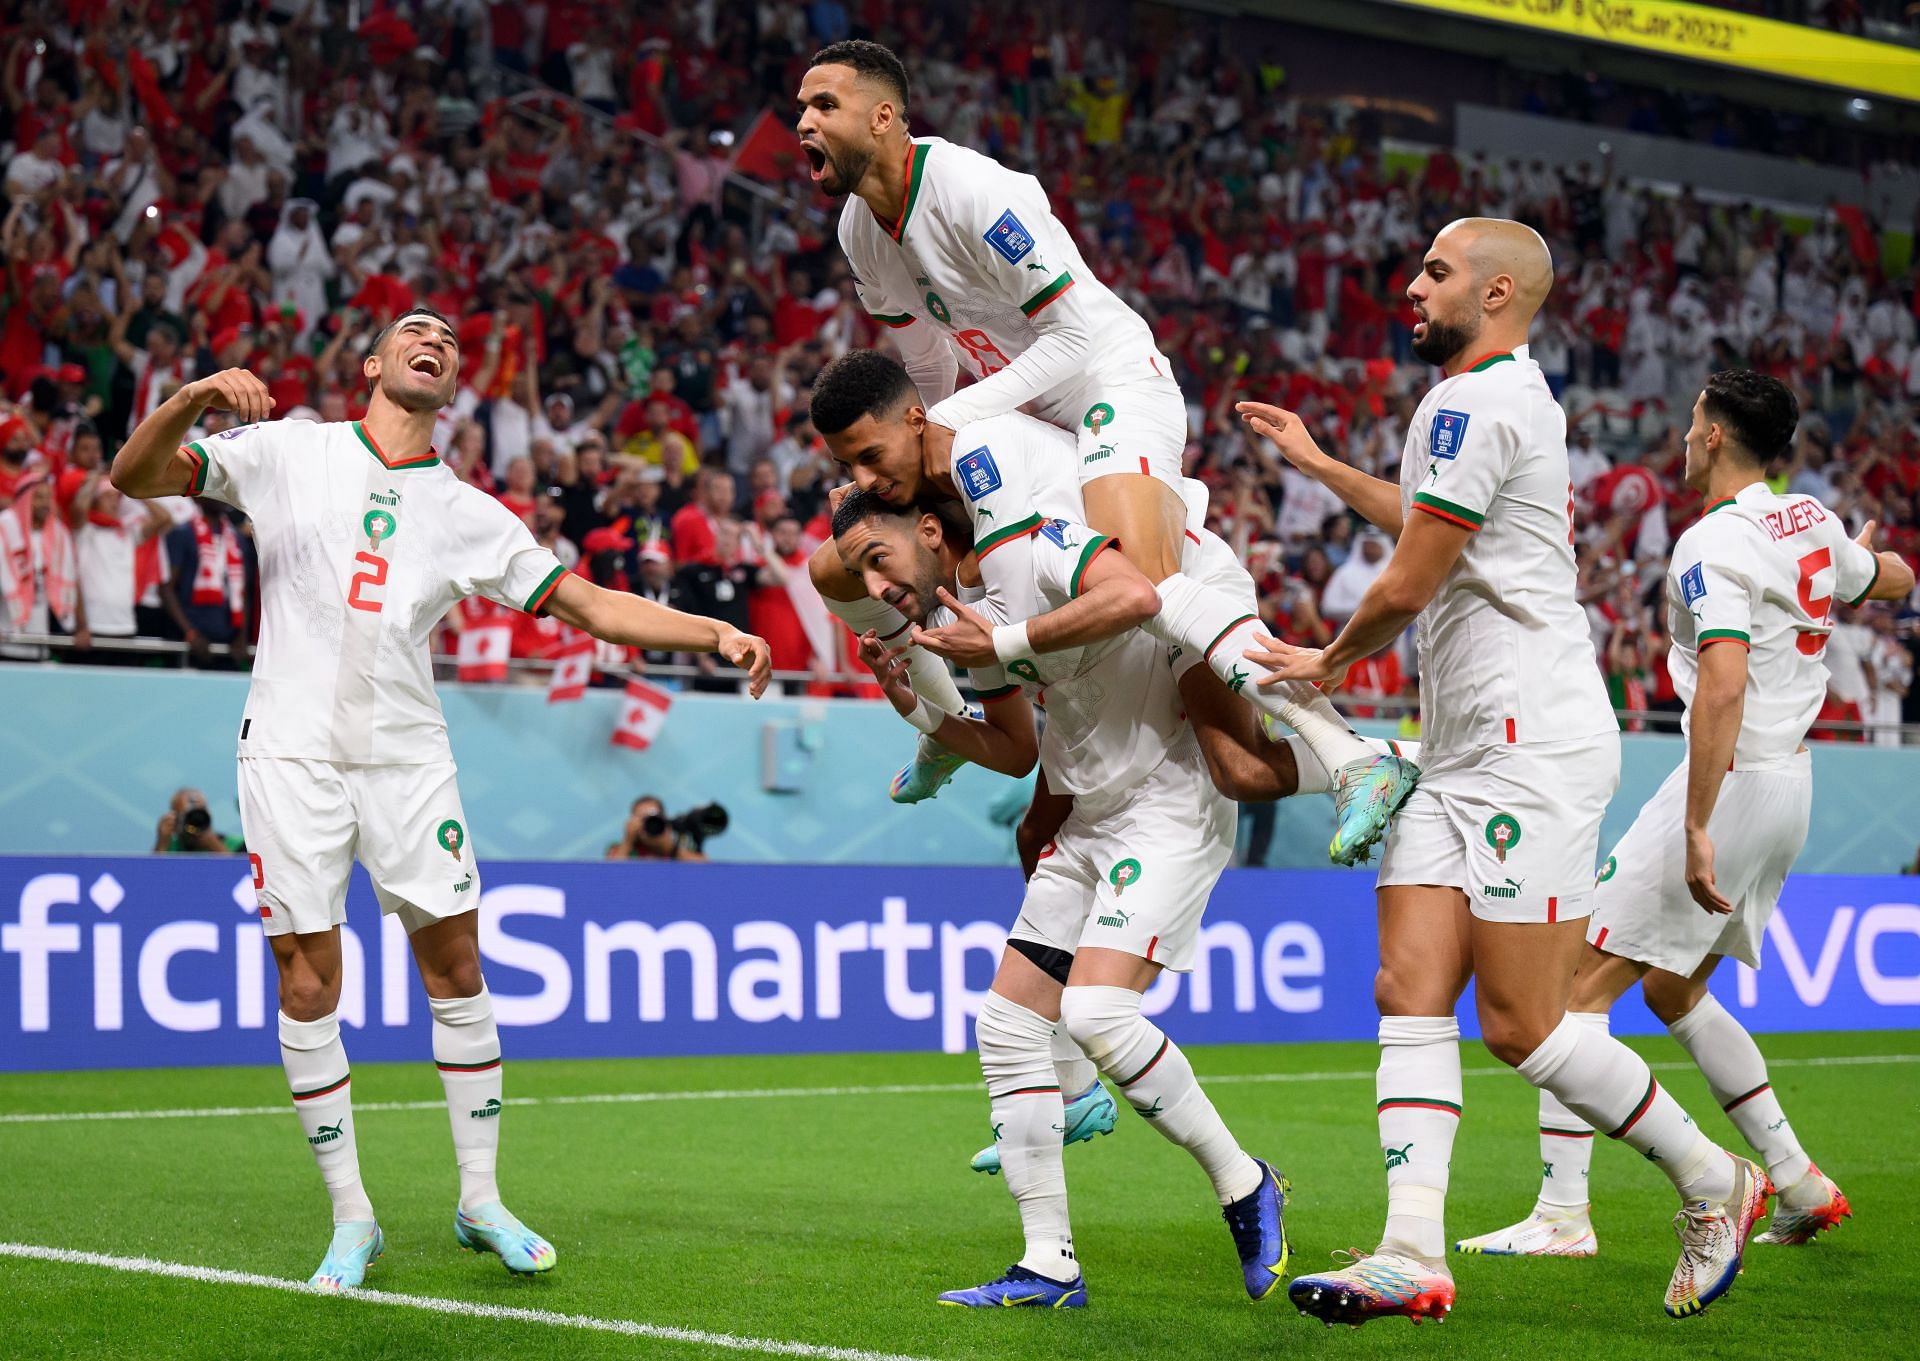 Morocco qualified for the last 16 for just the second time in history